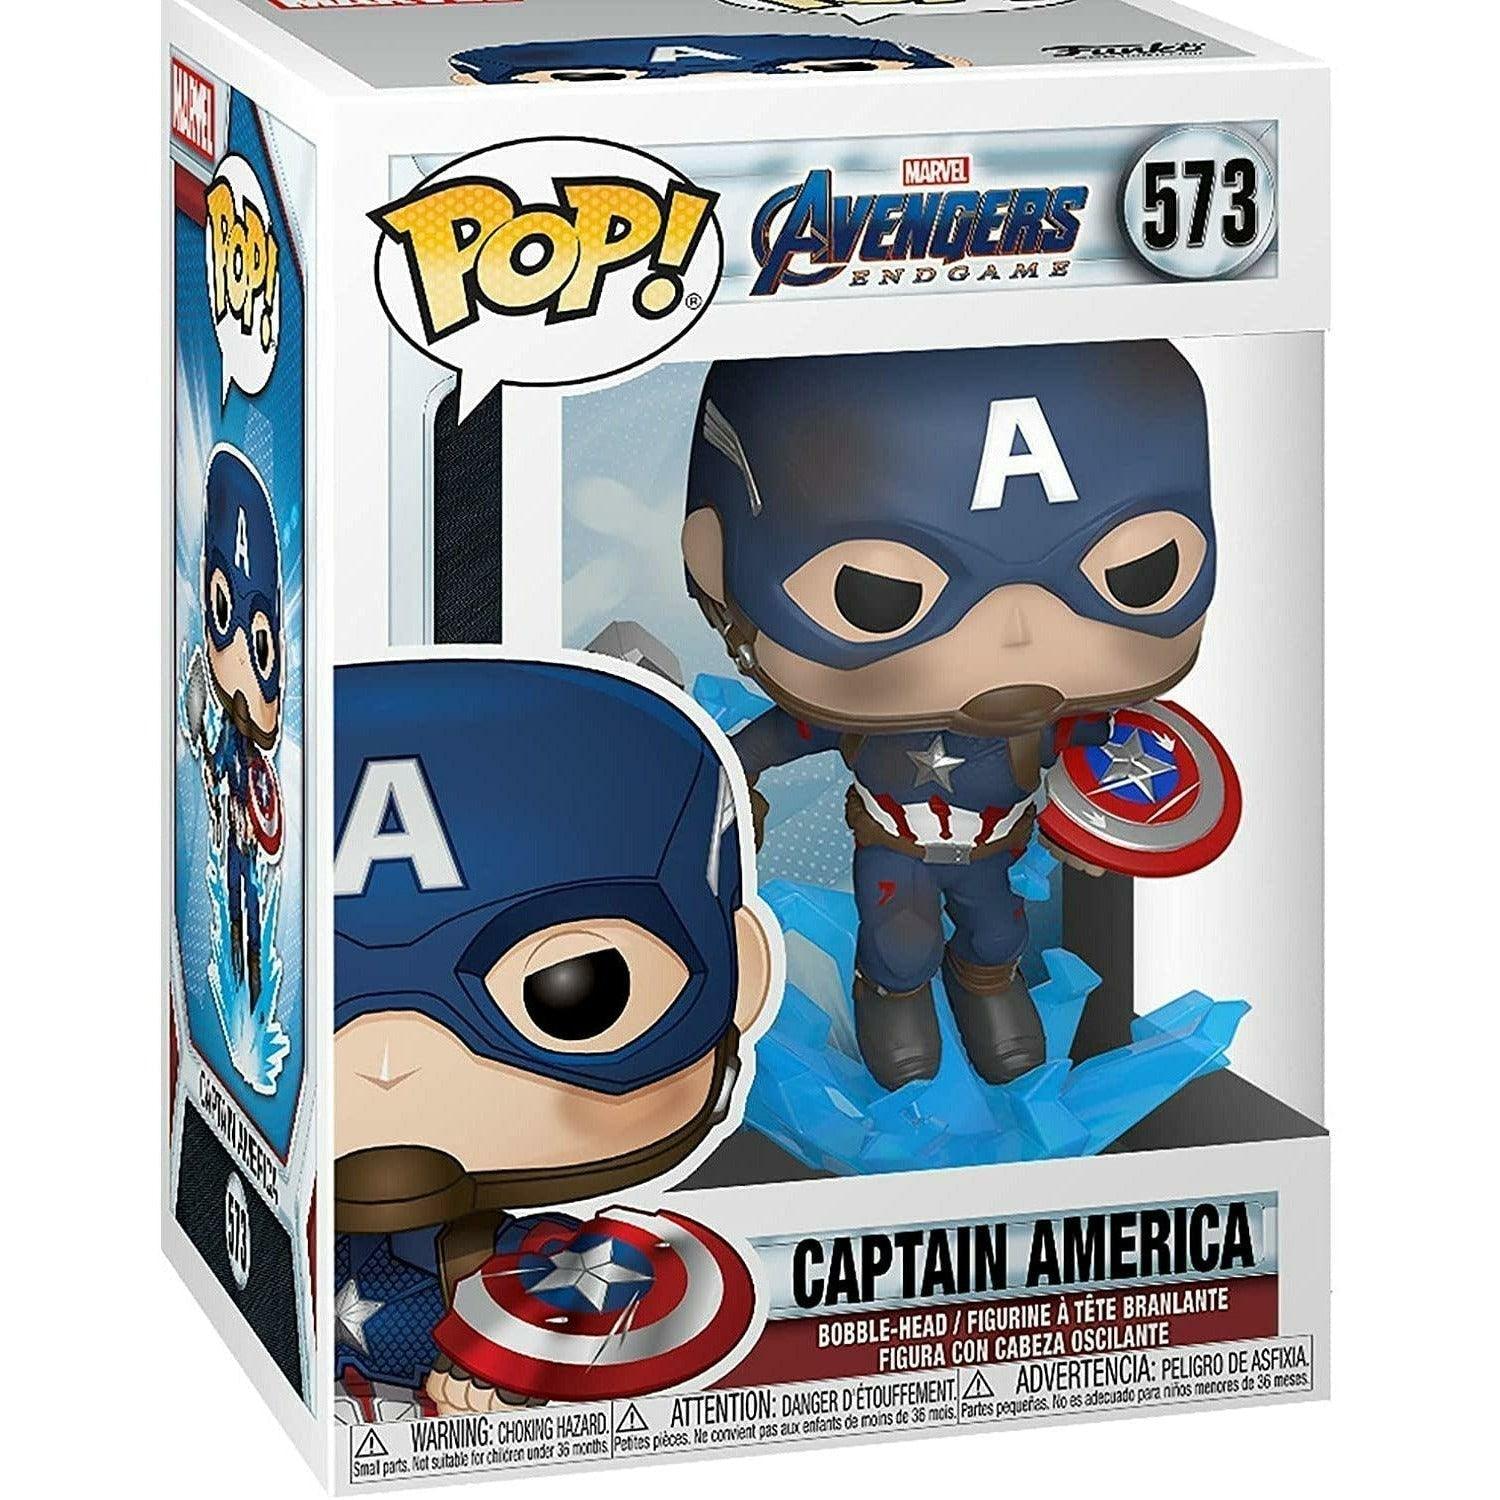 Funko Pop! Marvel Avengers Endgame - Captain America with Broken Shield & Mjoinir 3.75 Inches - BumbleToys - 18+, 4+ Years, 5-7 Years, Action Figures, Avengers, Boys, Captain America, Characters, Funko, Pre-Order